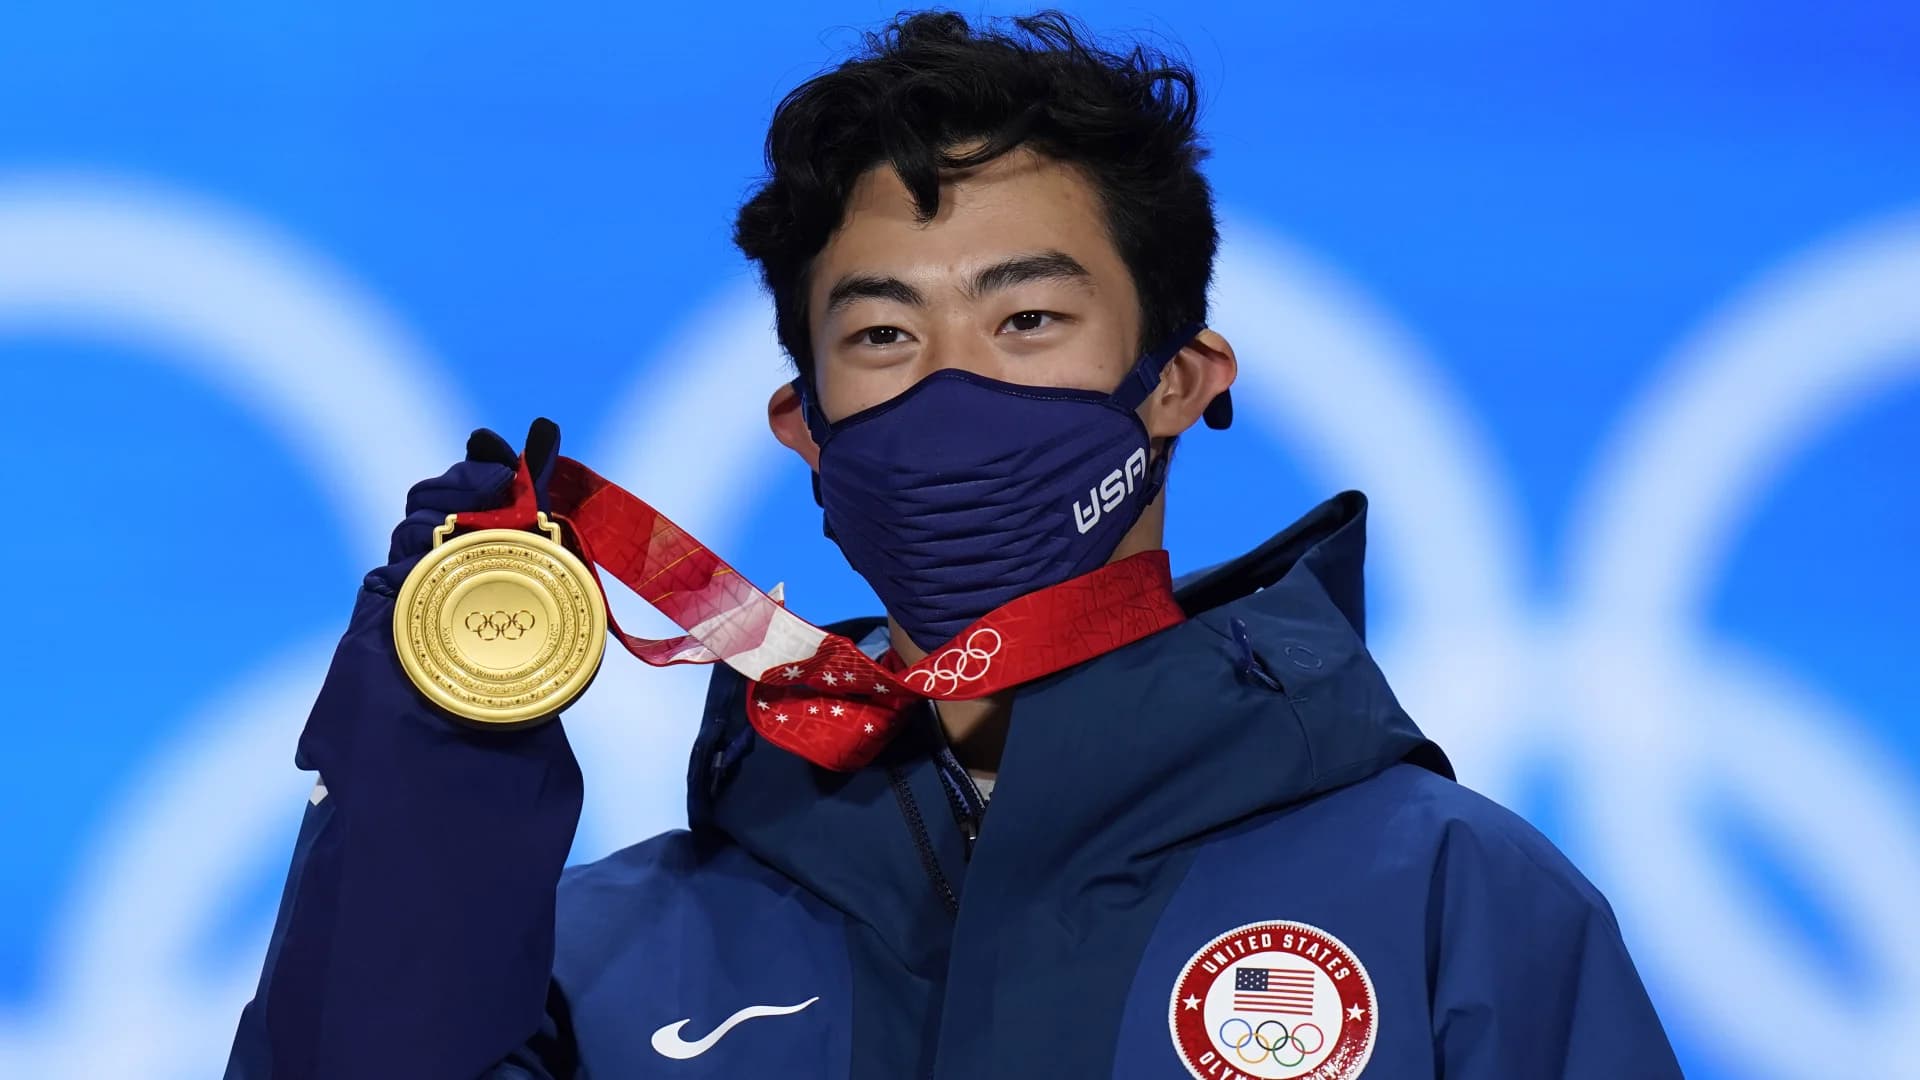 Nathan Chen not sure what's next after figure skating gold
